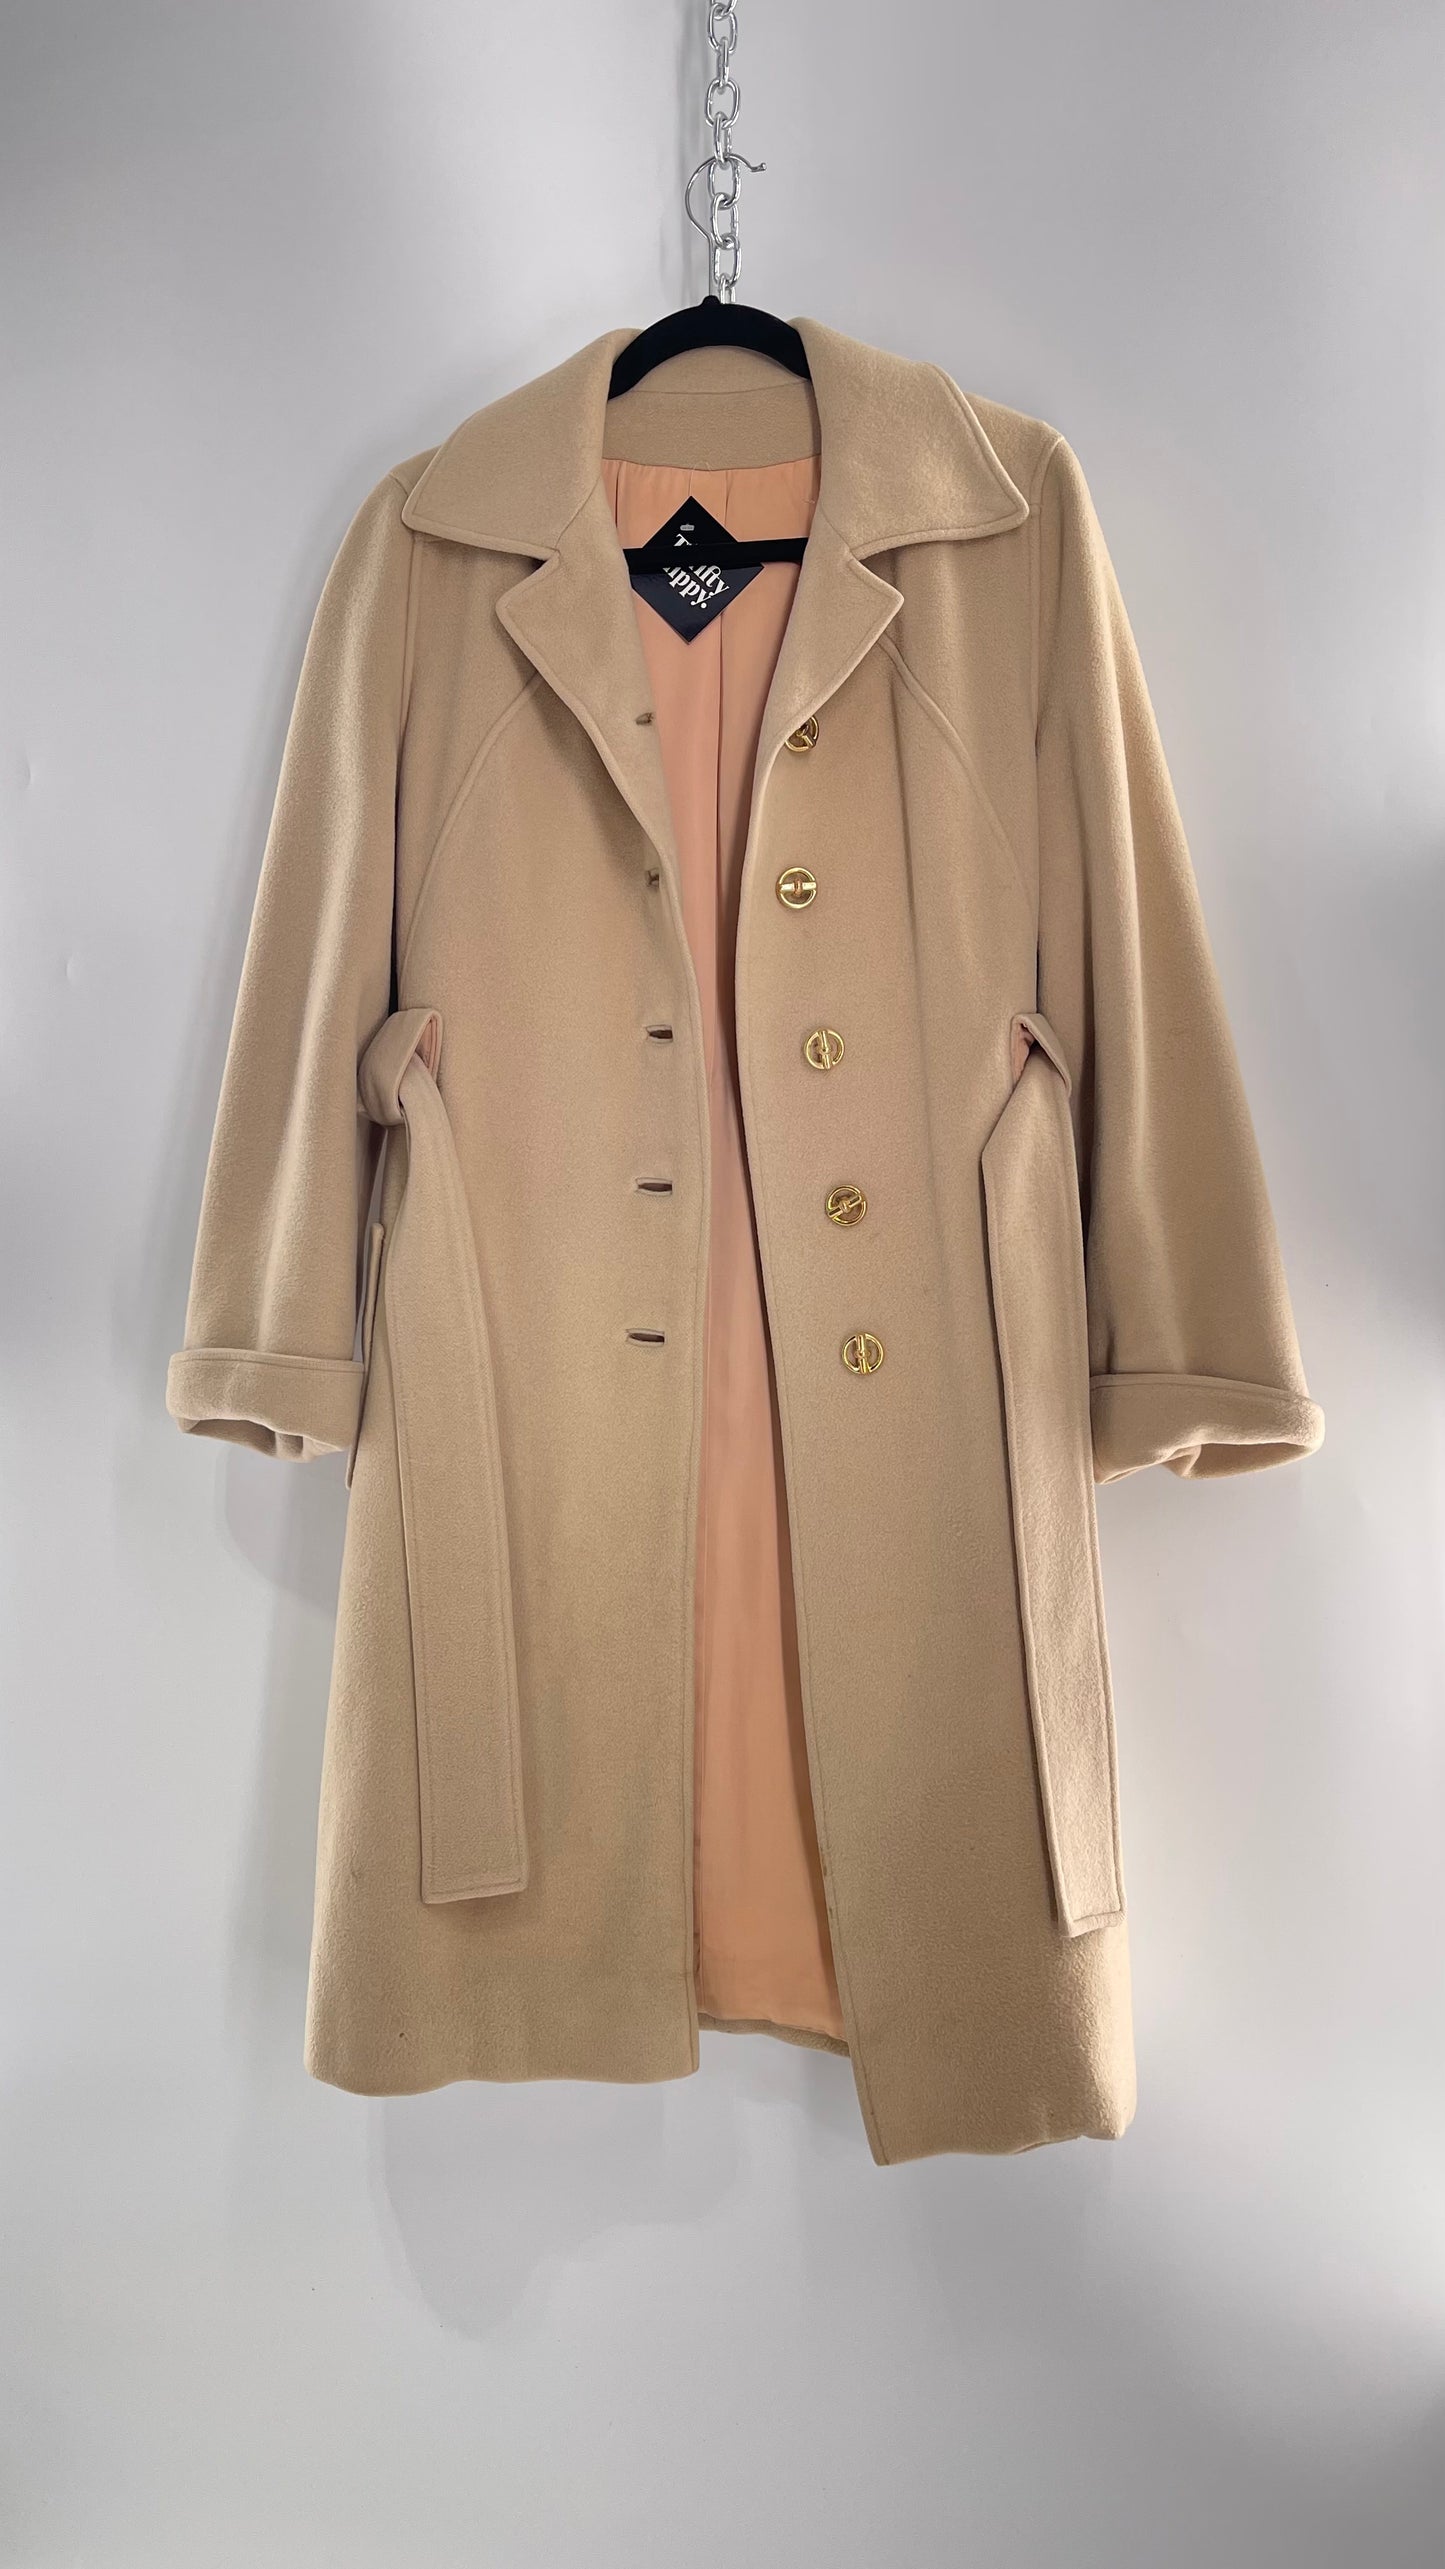 Vintage 100% Amicale Cashmere Beige Cream Coat with Apricot Satin Lining (C) (S/M)